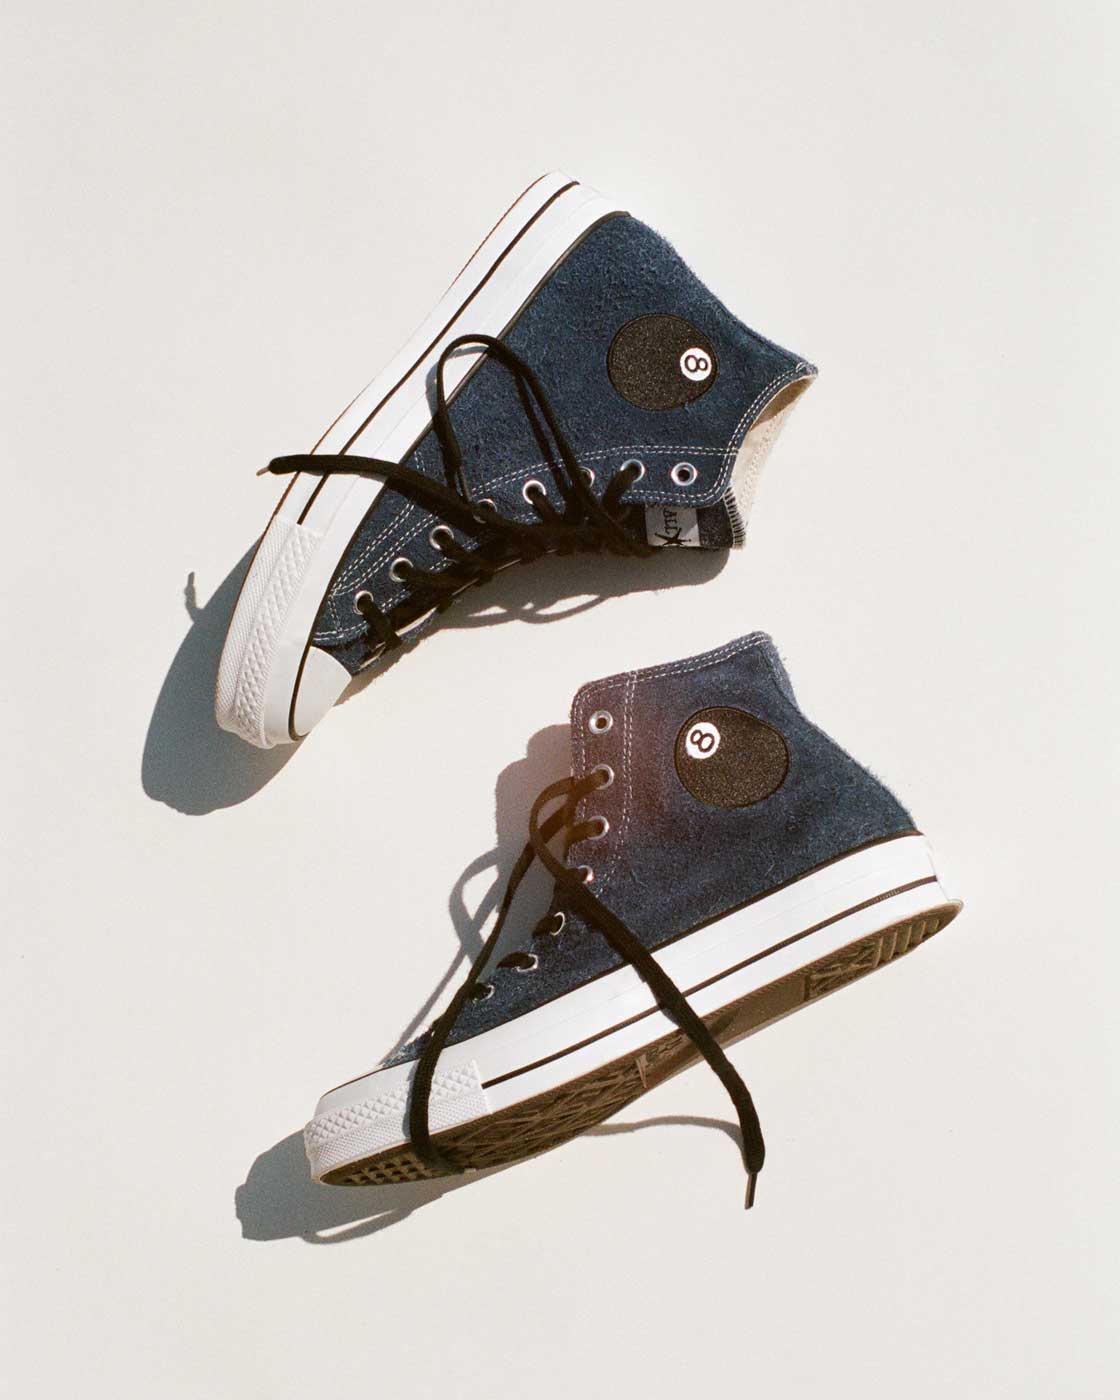 Stüssy's 8-Ball Fever Continues With Converse Collab Sneakers